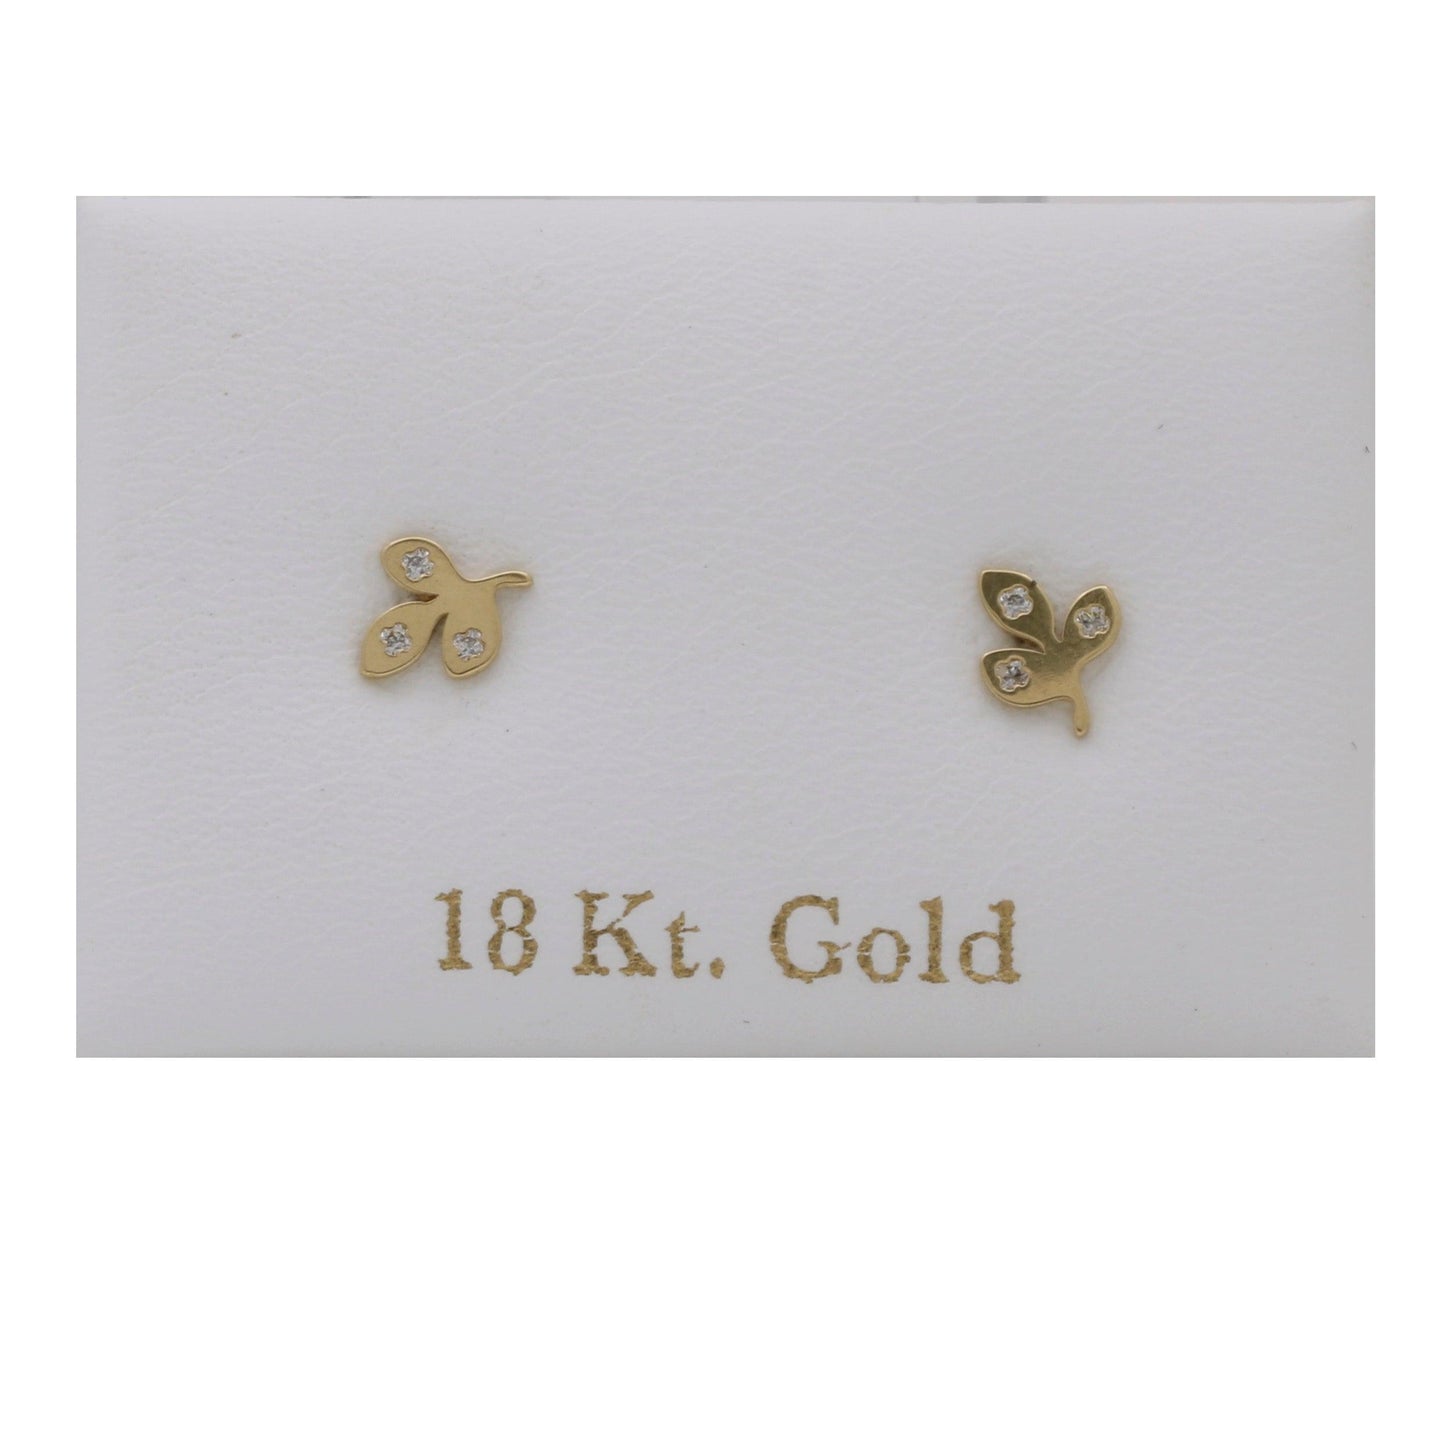 Three Leaves Stud Earrings in 18k Yellow Gold Children's Jewelry - 31 Jewels Inc.